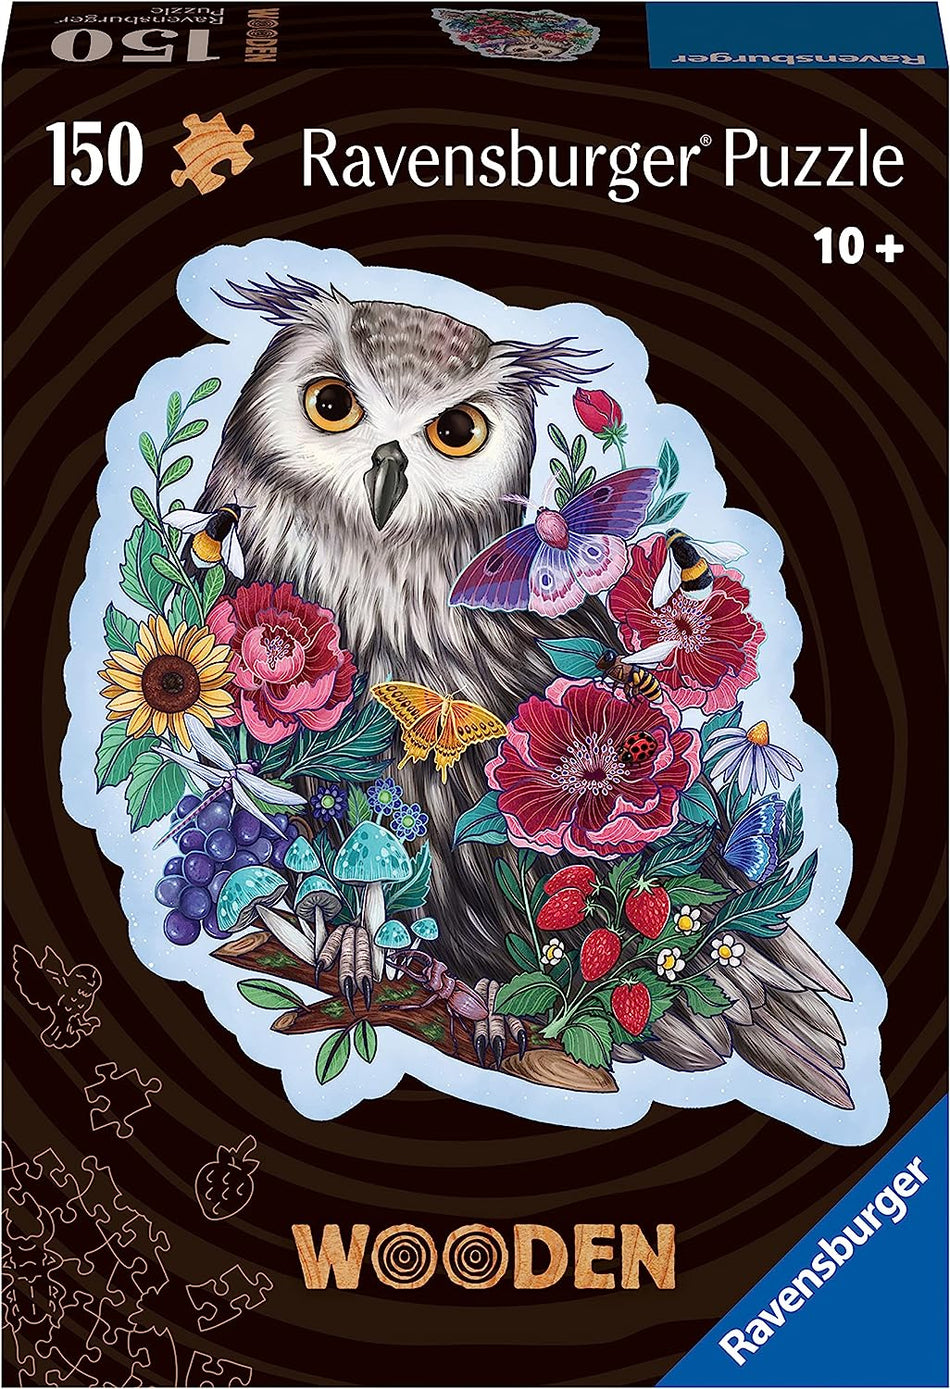 Ravensburger: Mysterious Owl: 150 Piece Wooden Puzzle